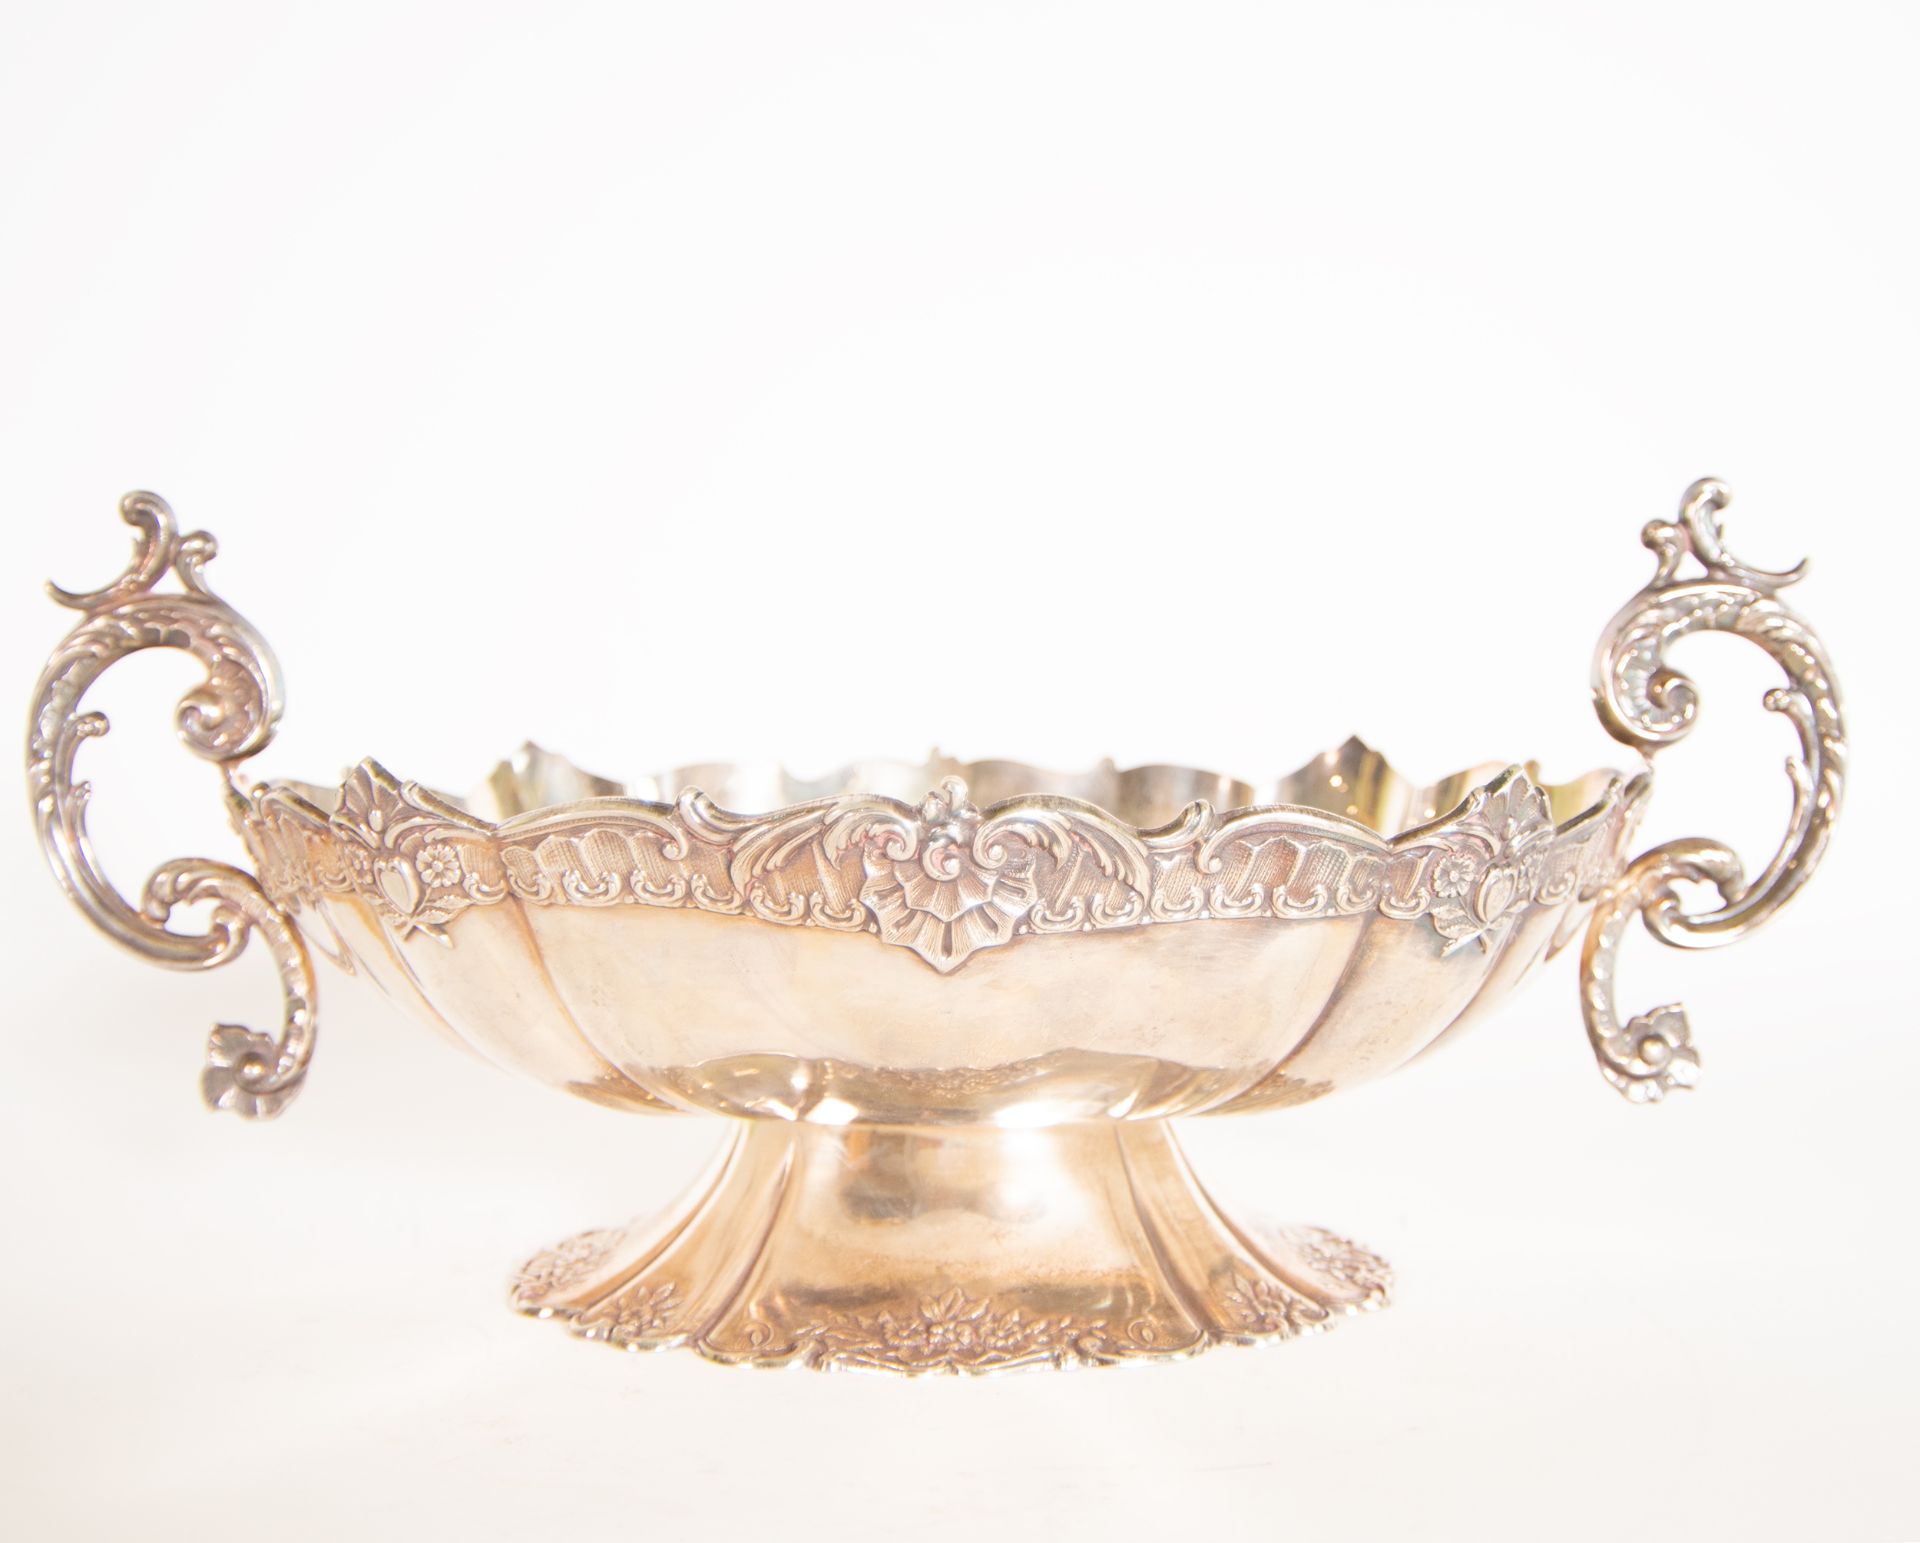 Important fruit bowl in solid sterling silver, French school of the 19th century